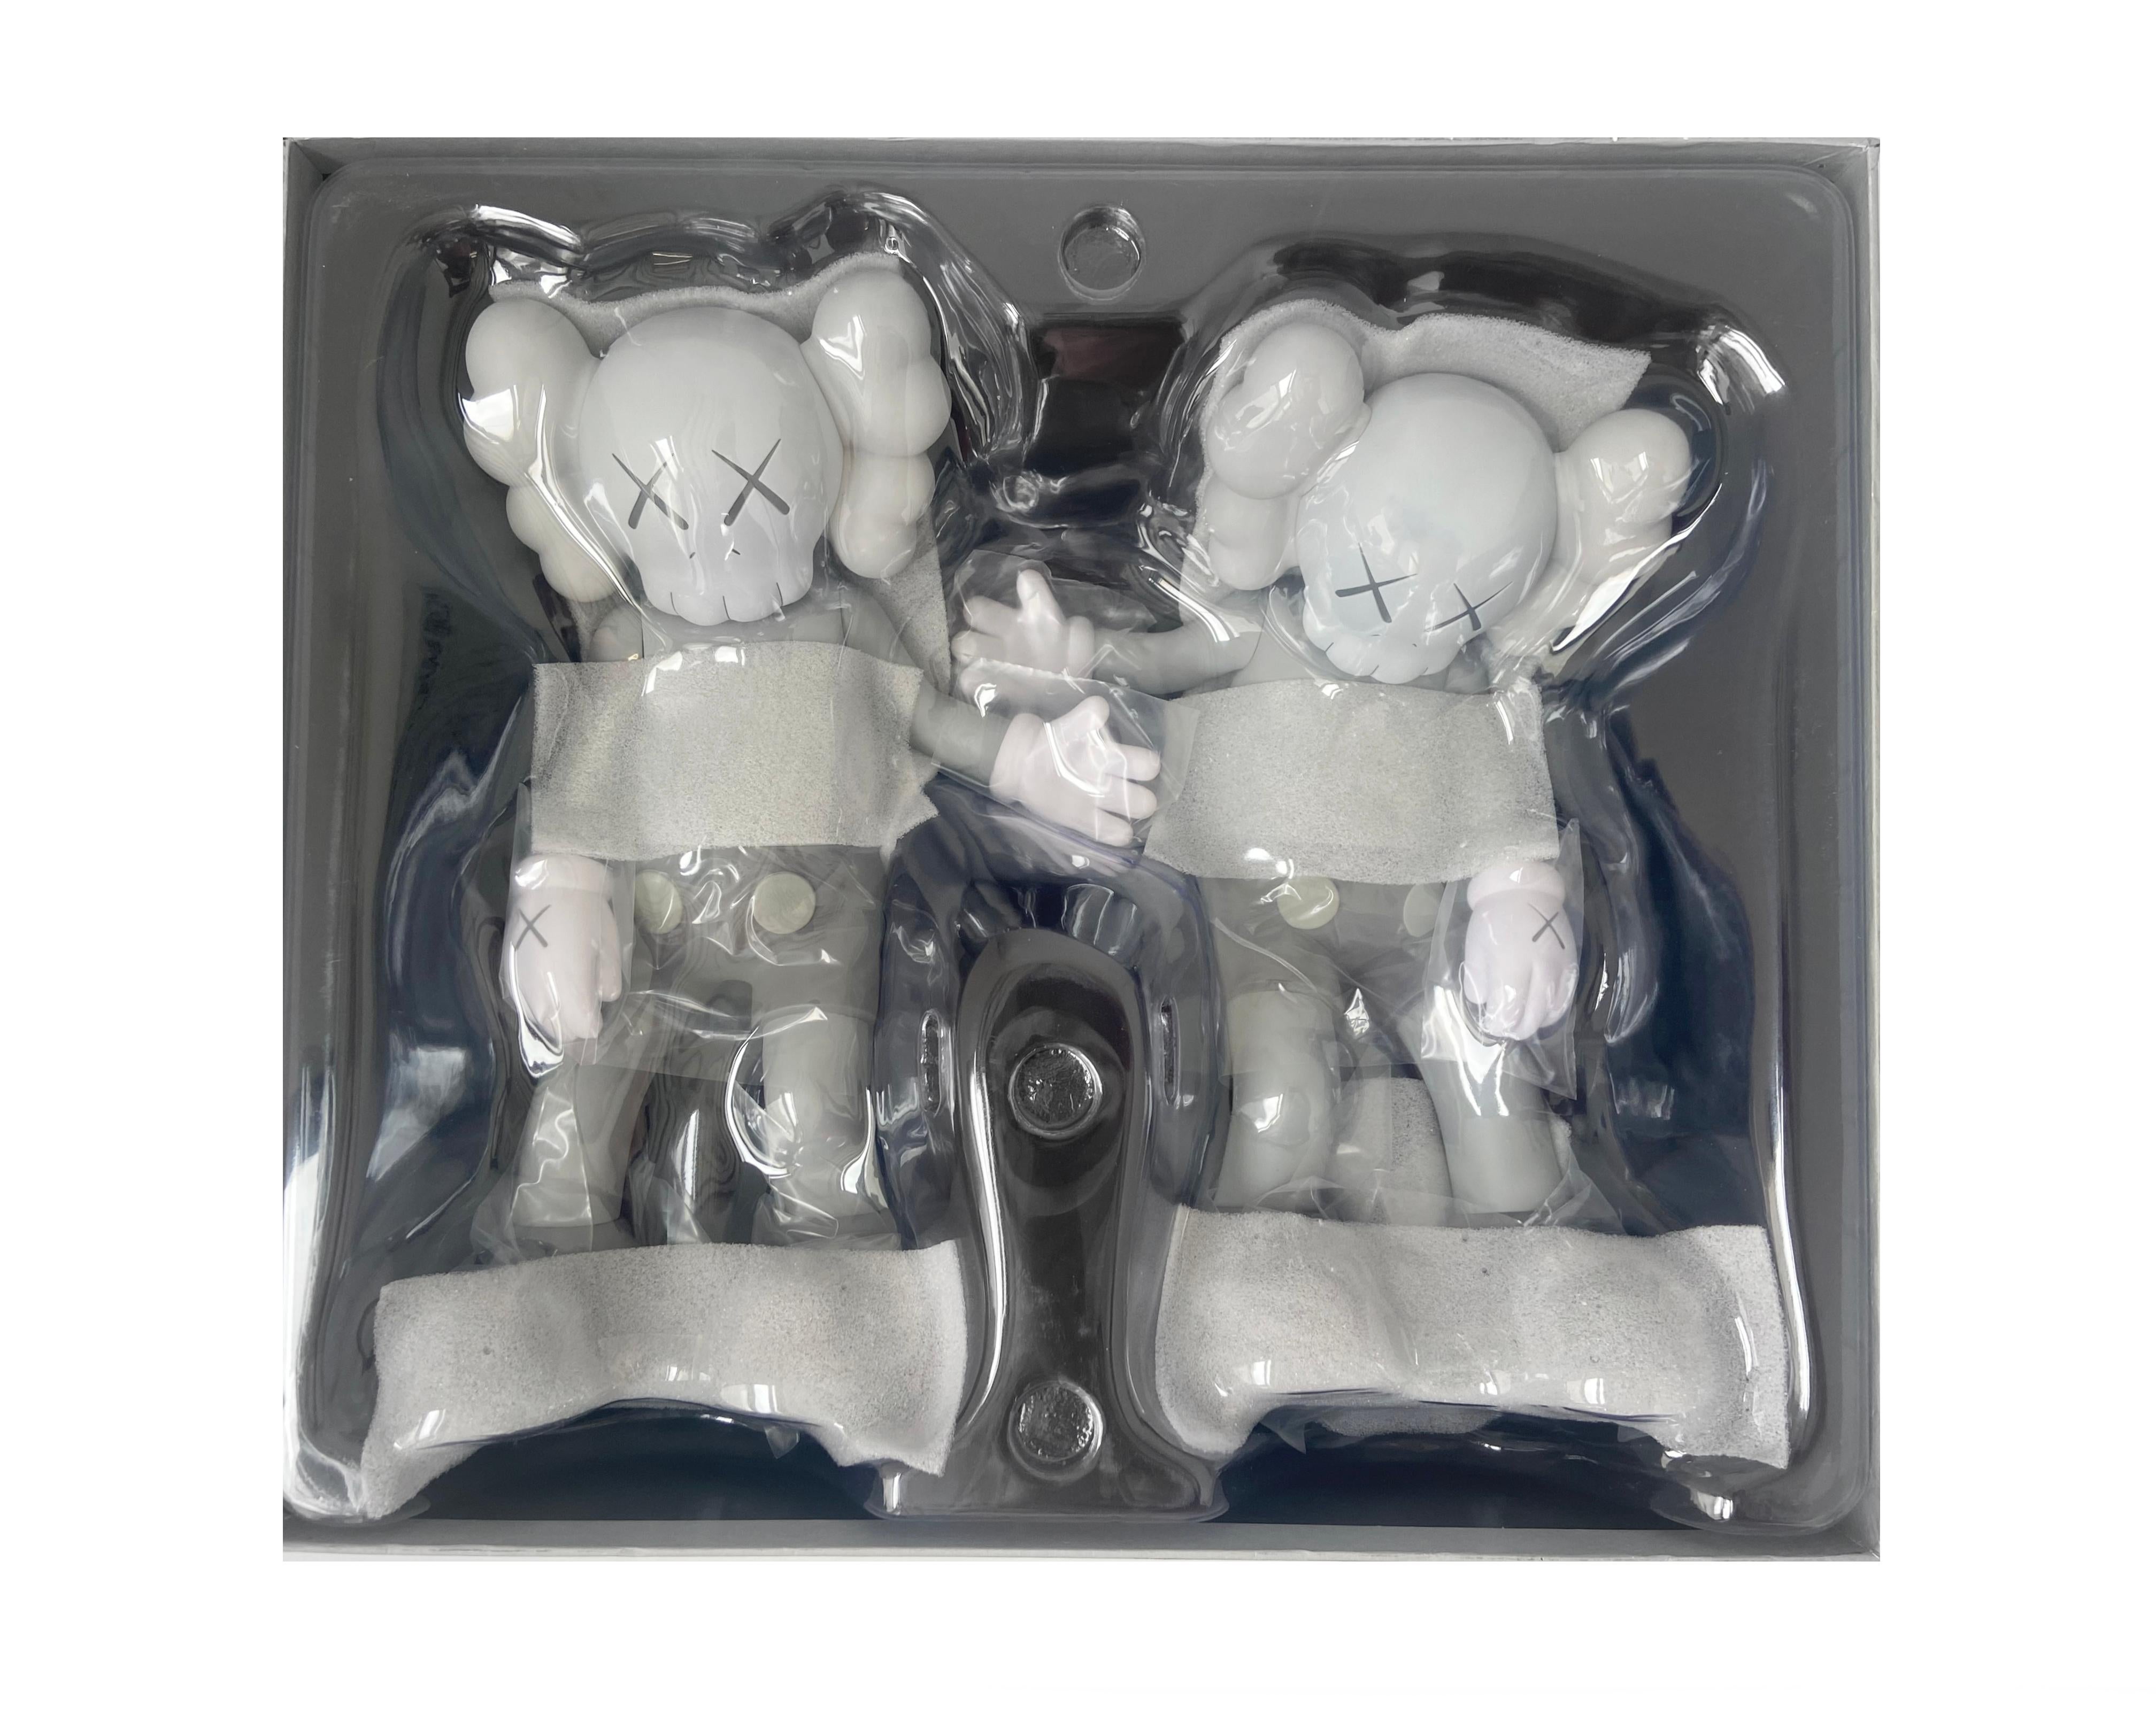 KAWS Along The Way (Grey). New and unopened in its original box. The KAWS Along The Way figurine is a rendition of the artist's 2013 18 foot wood sculpture originally exhibited at Mary Boone gallery New York. The KAWS Along The Way figurine is a